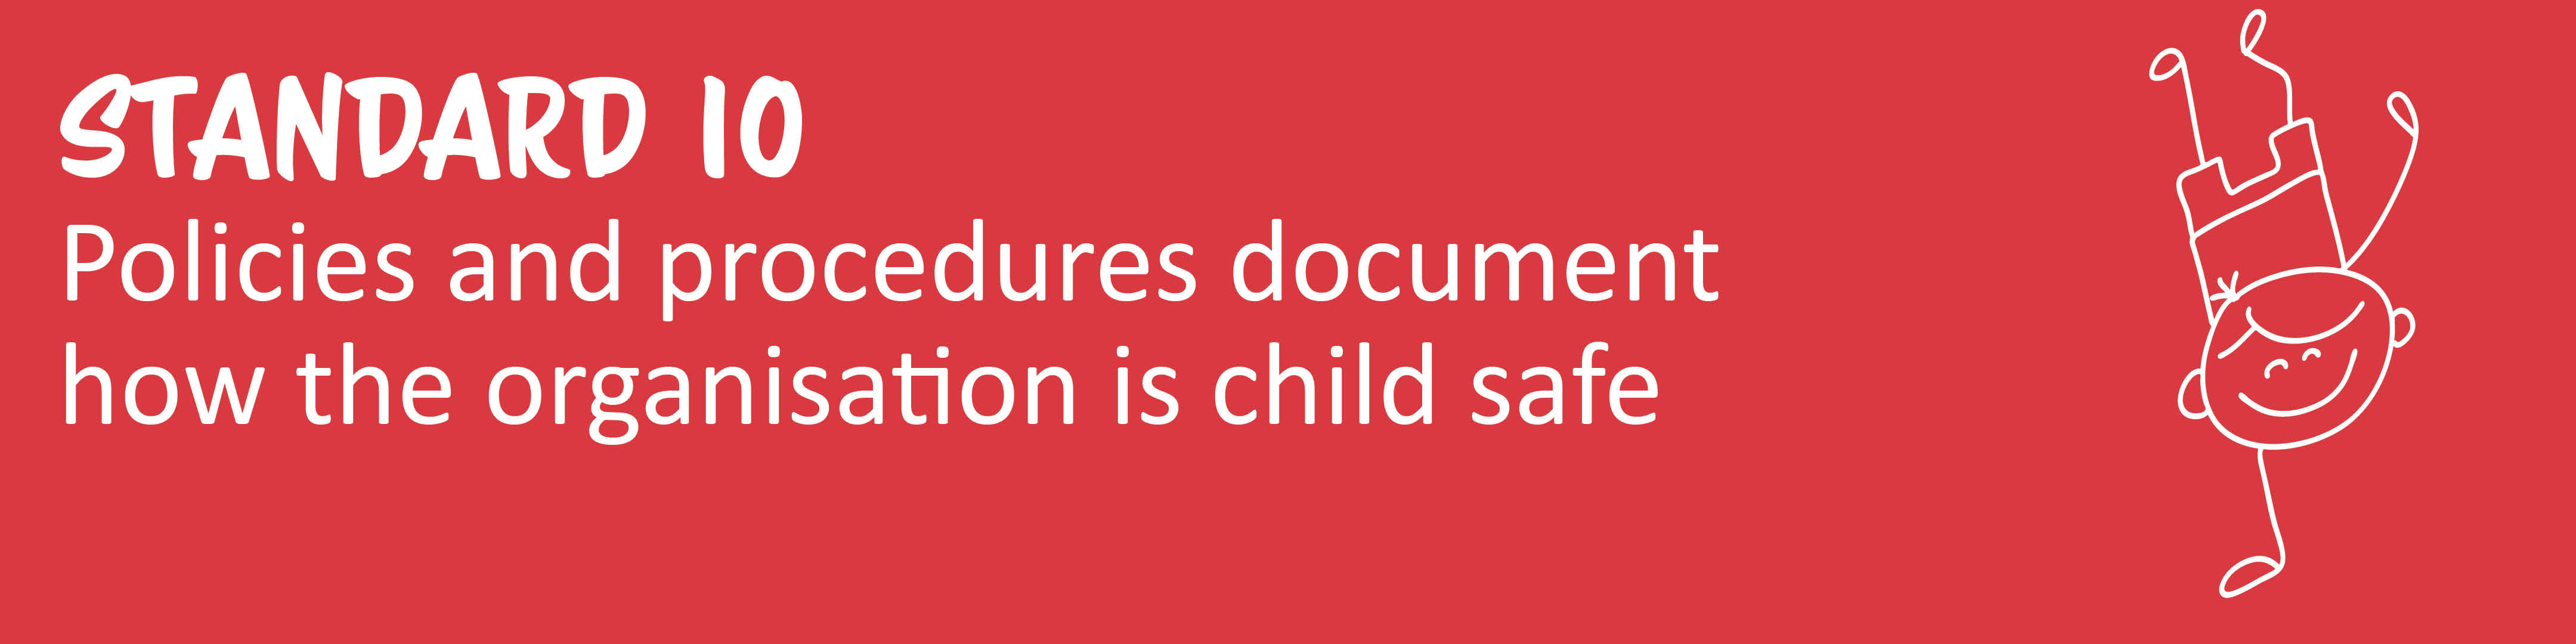 Child Safe Standard 10: Policies and Procedures document how the organization is child safe